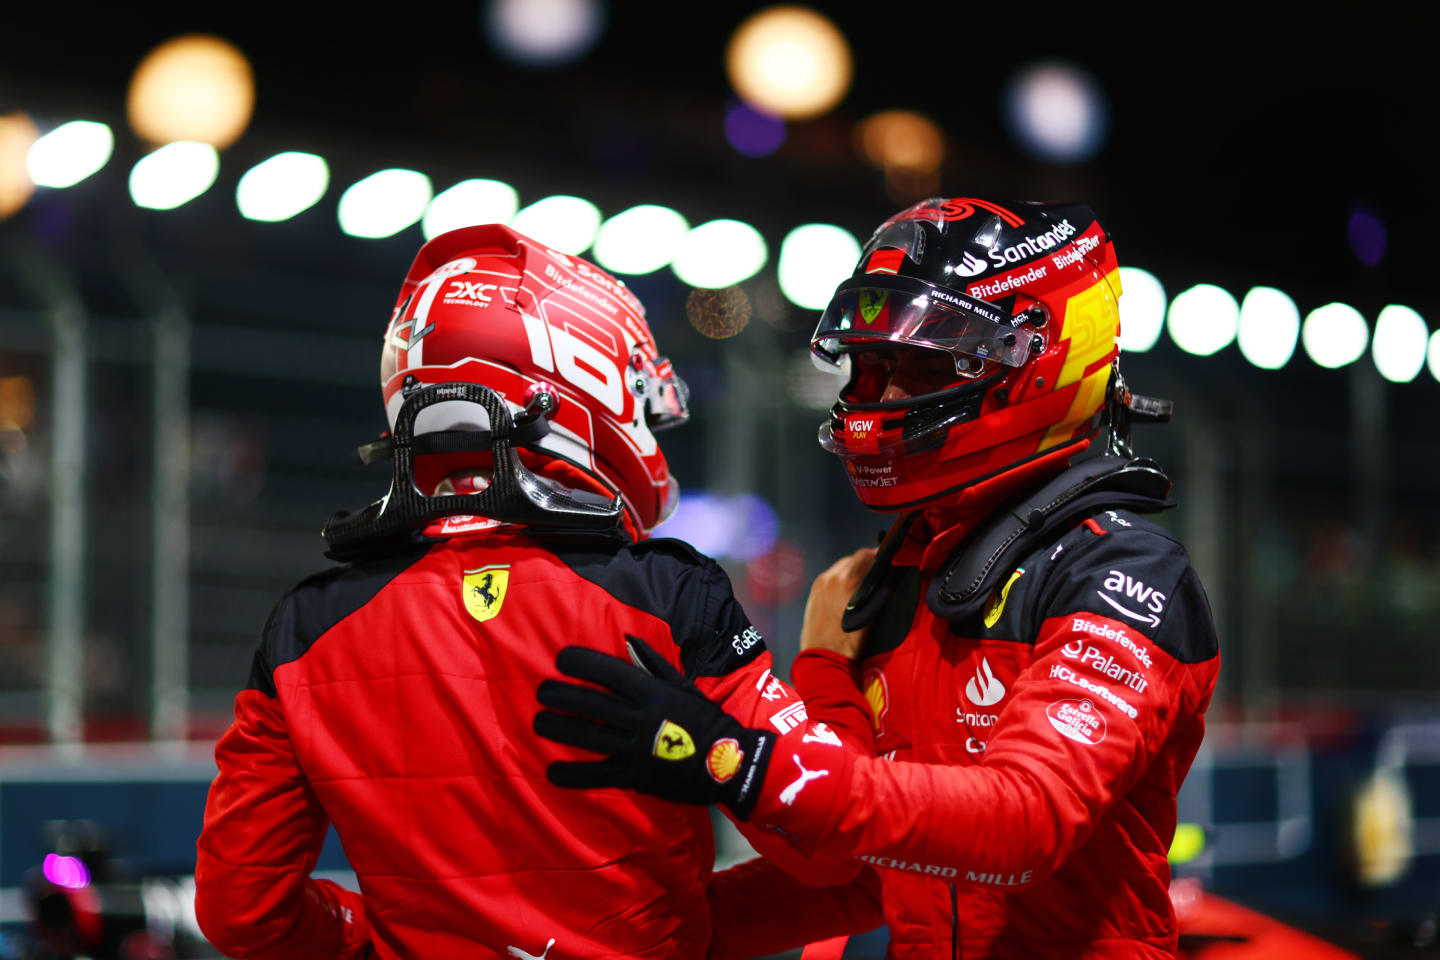 SINGAPORE, SINGAPORE - SEPTEMBER 16: Pole position qualifier Carlos Sainz of Spain and Ferrari celebrates with team-mate and third placed qualifier Charles Leclerc of Monaco and Ferrari in parc ferme during qualifying ahead of the F1 Grand Prix of Singapore at Marina Bay Street Circuit on September 16, 2023 in Singapore, Singapore. (Photo by Dan Istitene - Formula 1/Formula 1 via Getty Images)